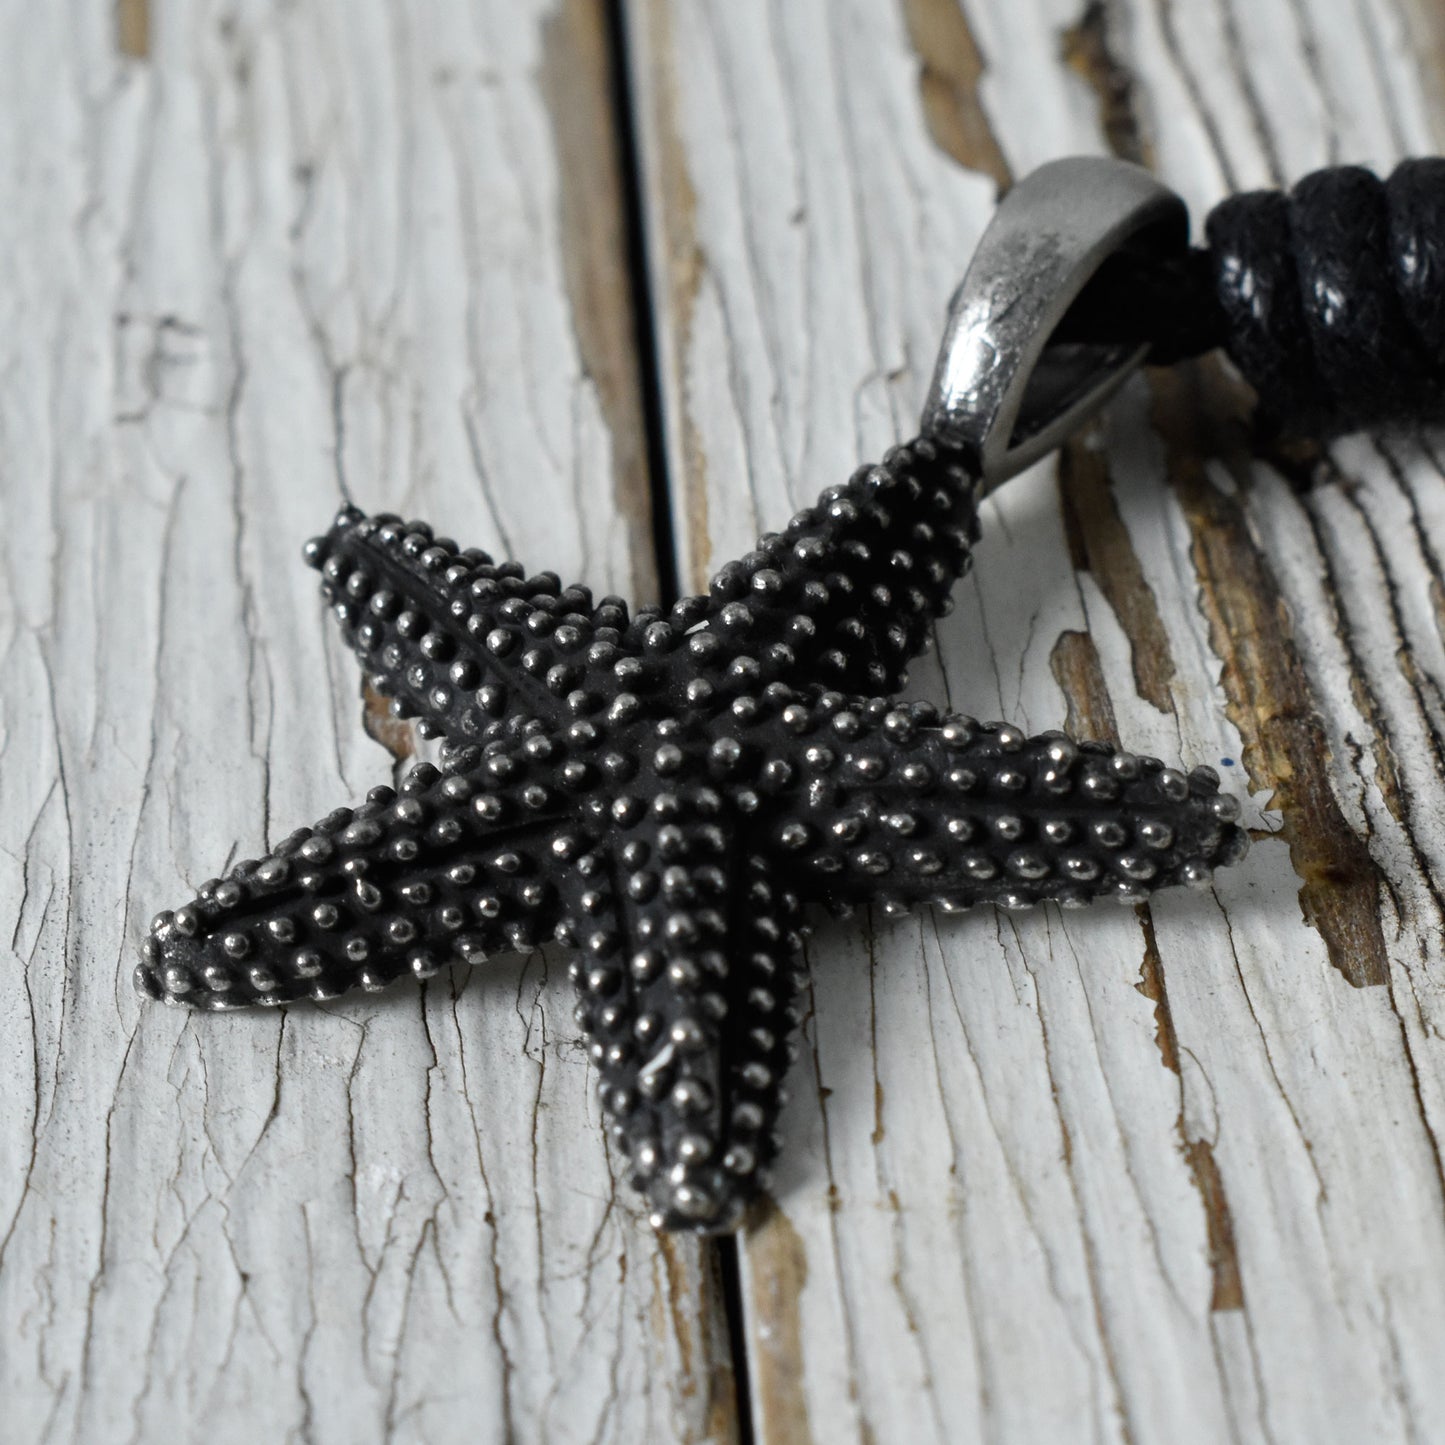 Starfish Silver Pewter Charm Necklace Pendant Jewelry